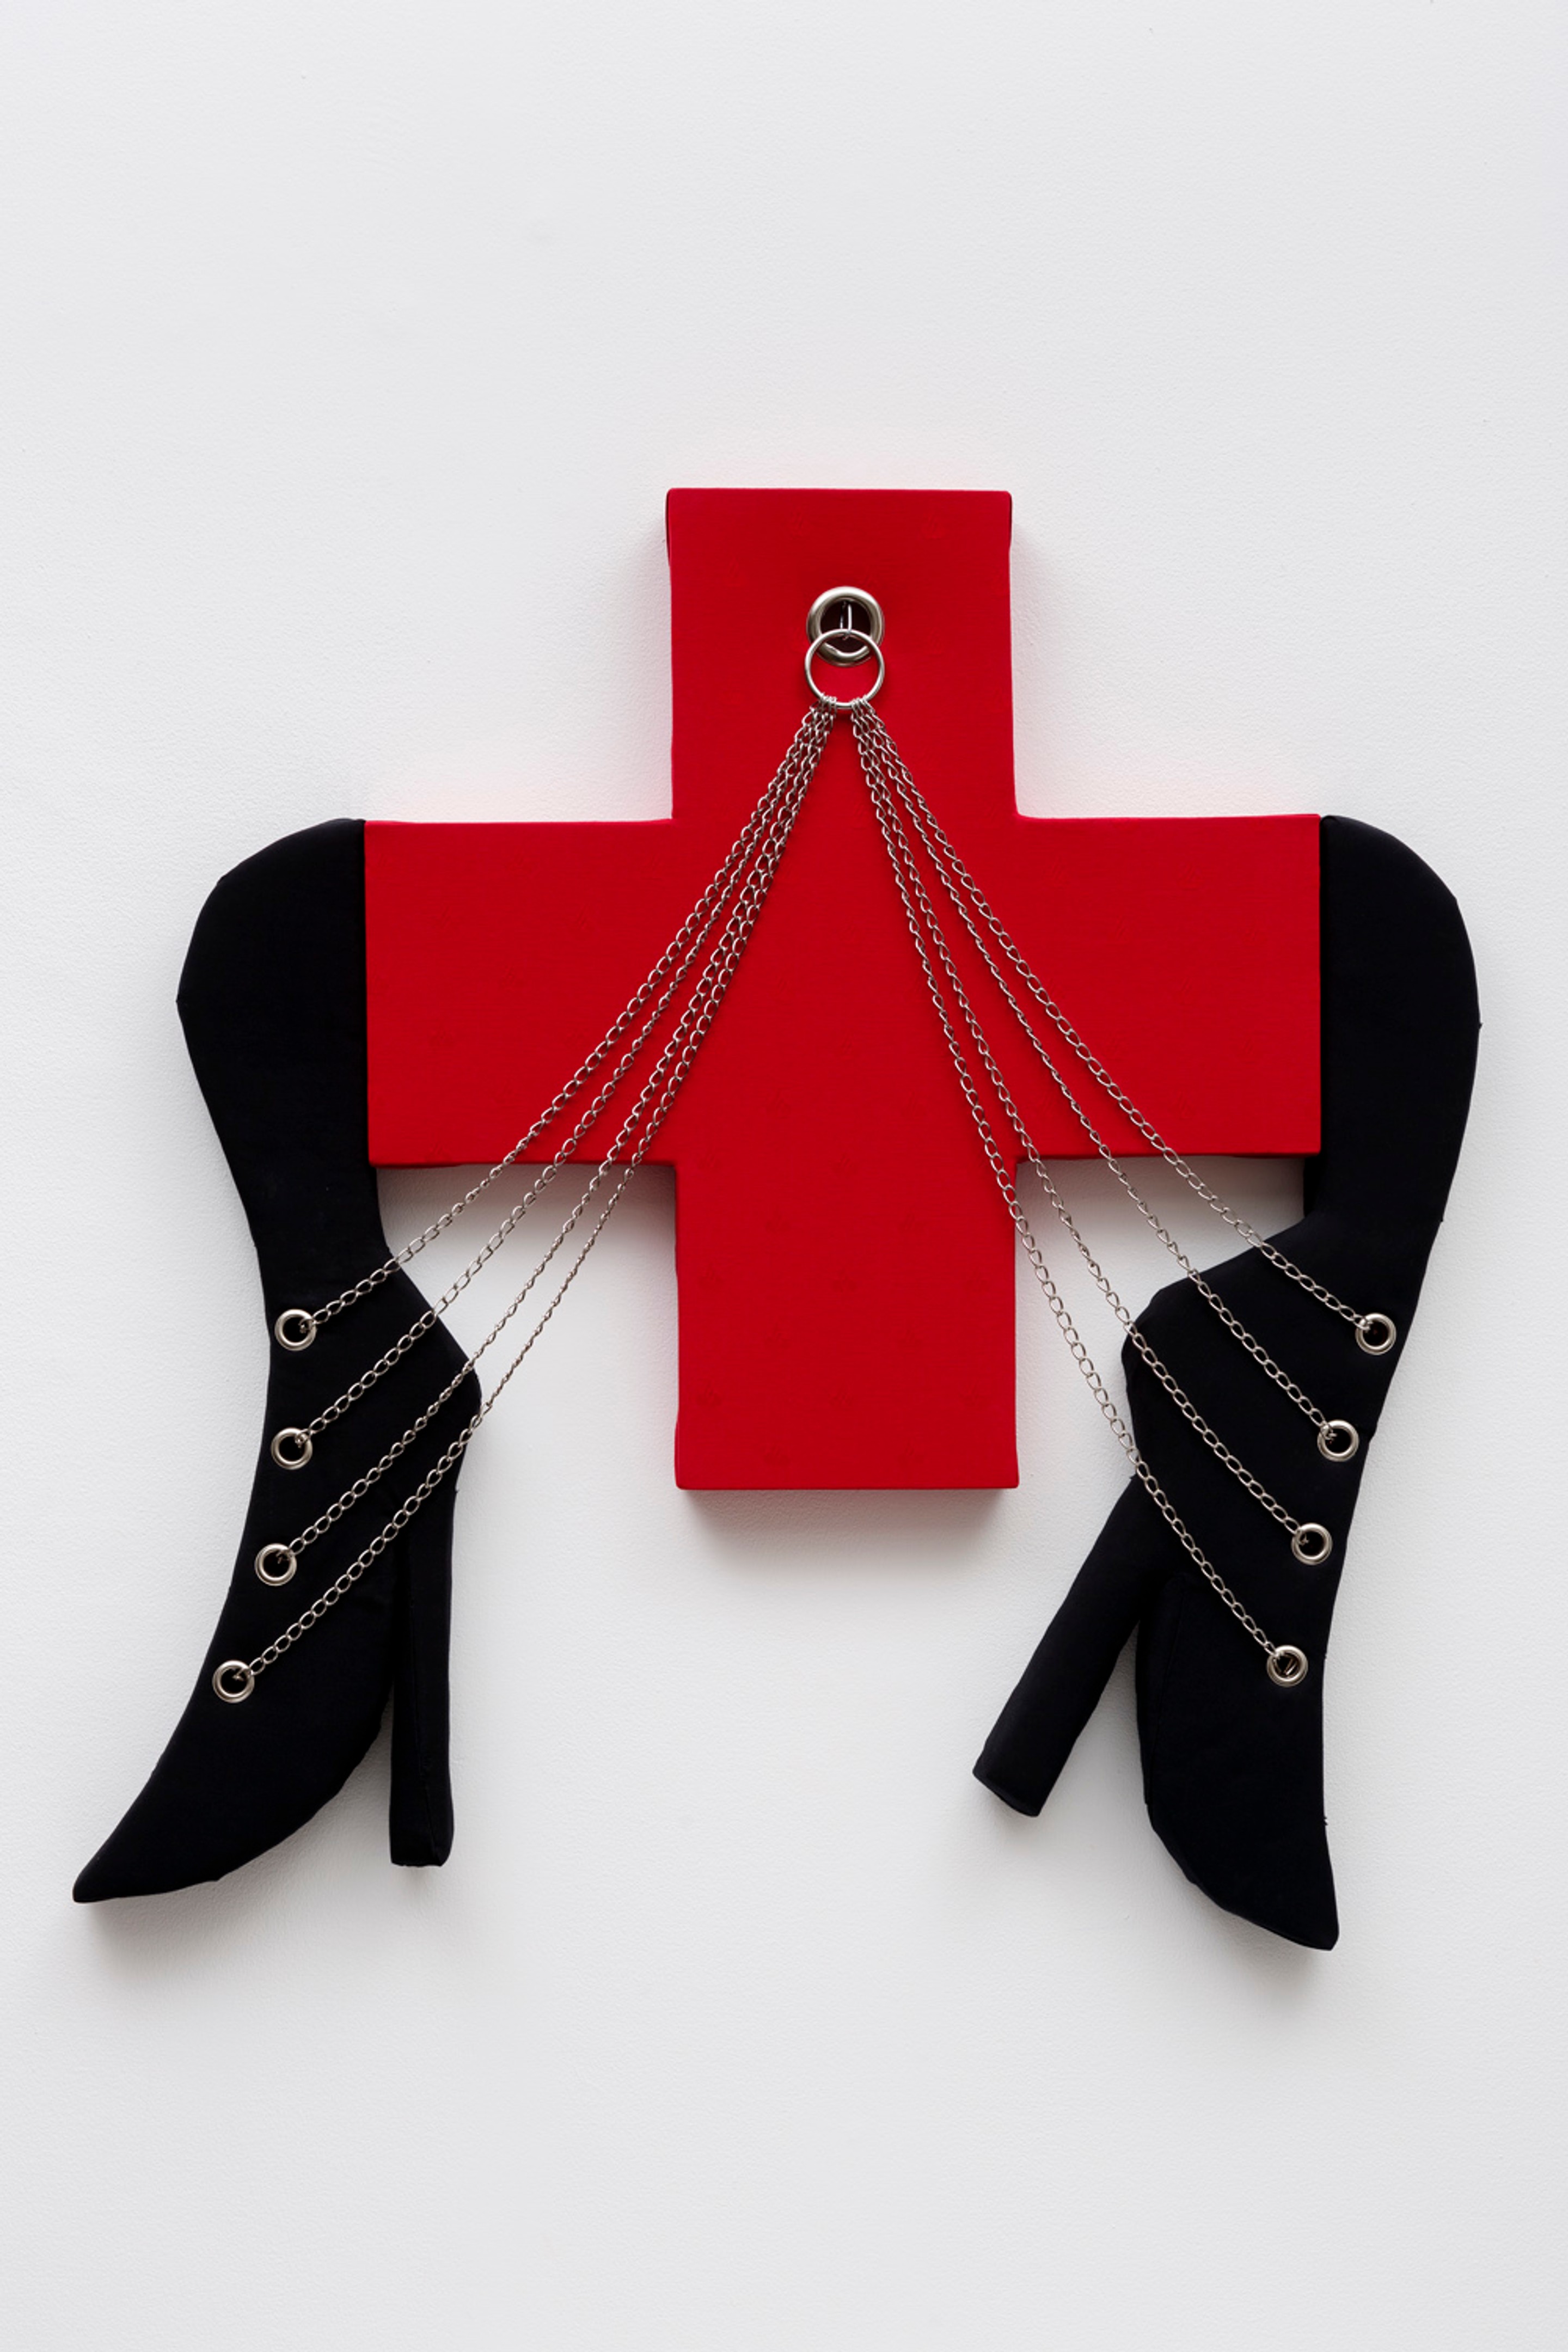 Flying Icarus Donation Box with Bells (2019)
Fabric, canvas, hardware, chain on shaped panel

43.75h × 37w 2.5d inches (111.5h x 94.5w x 6.5d cm)